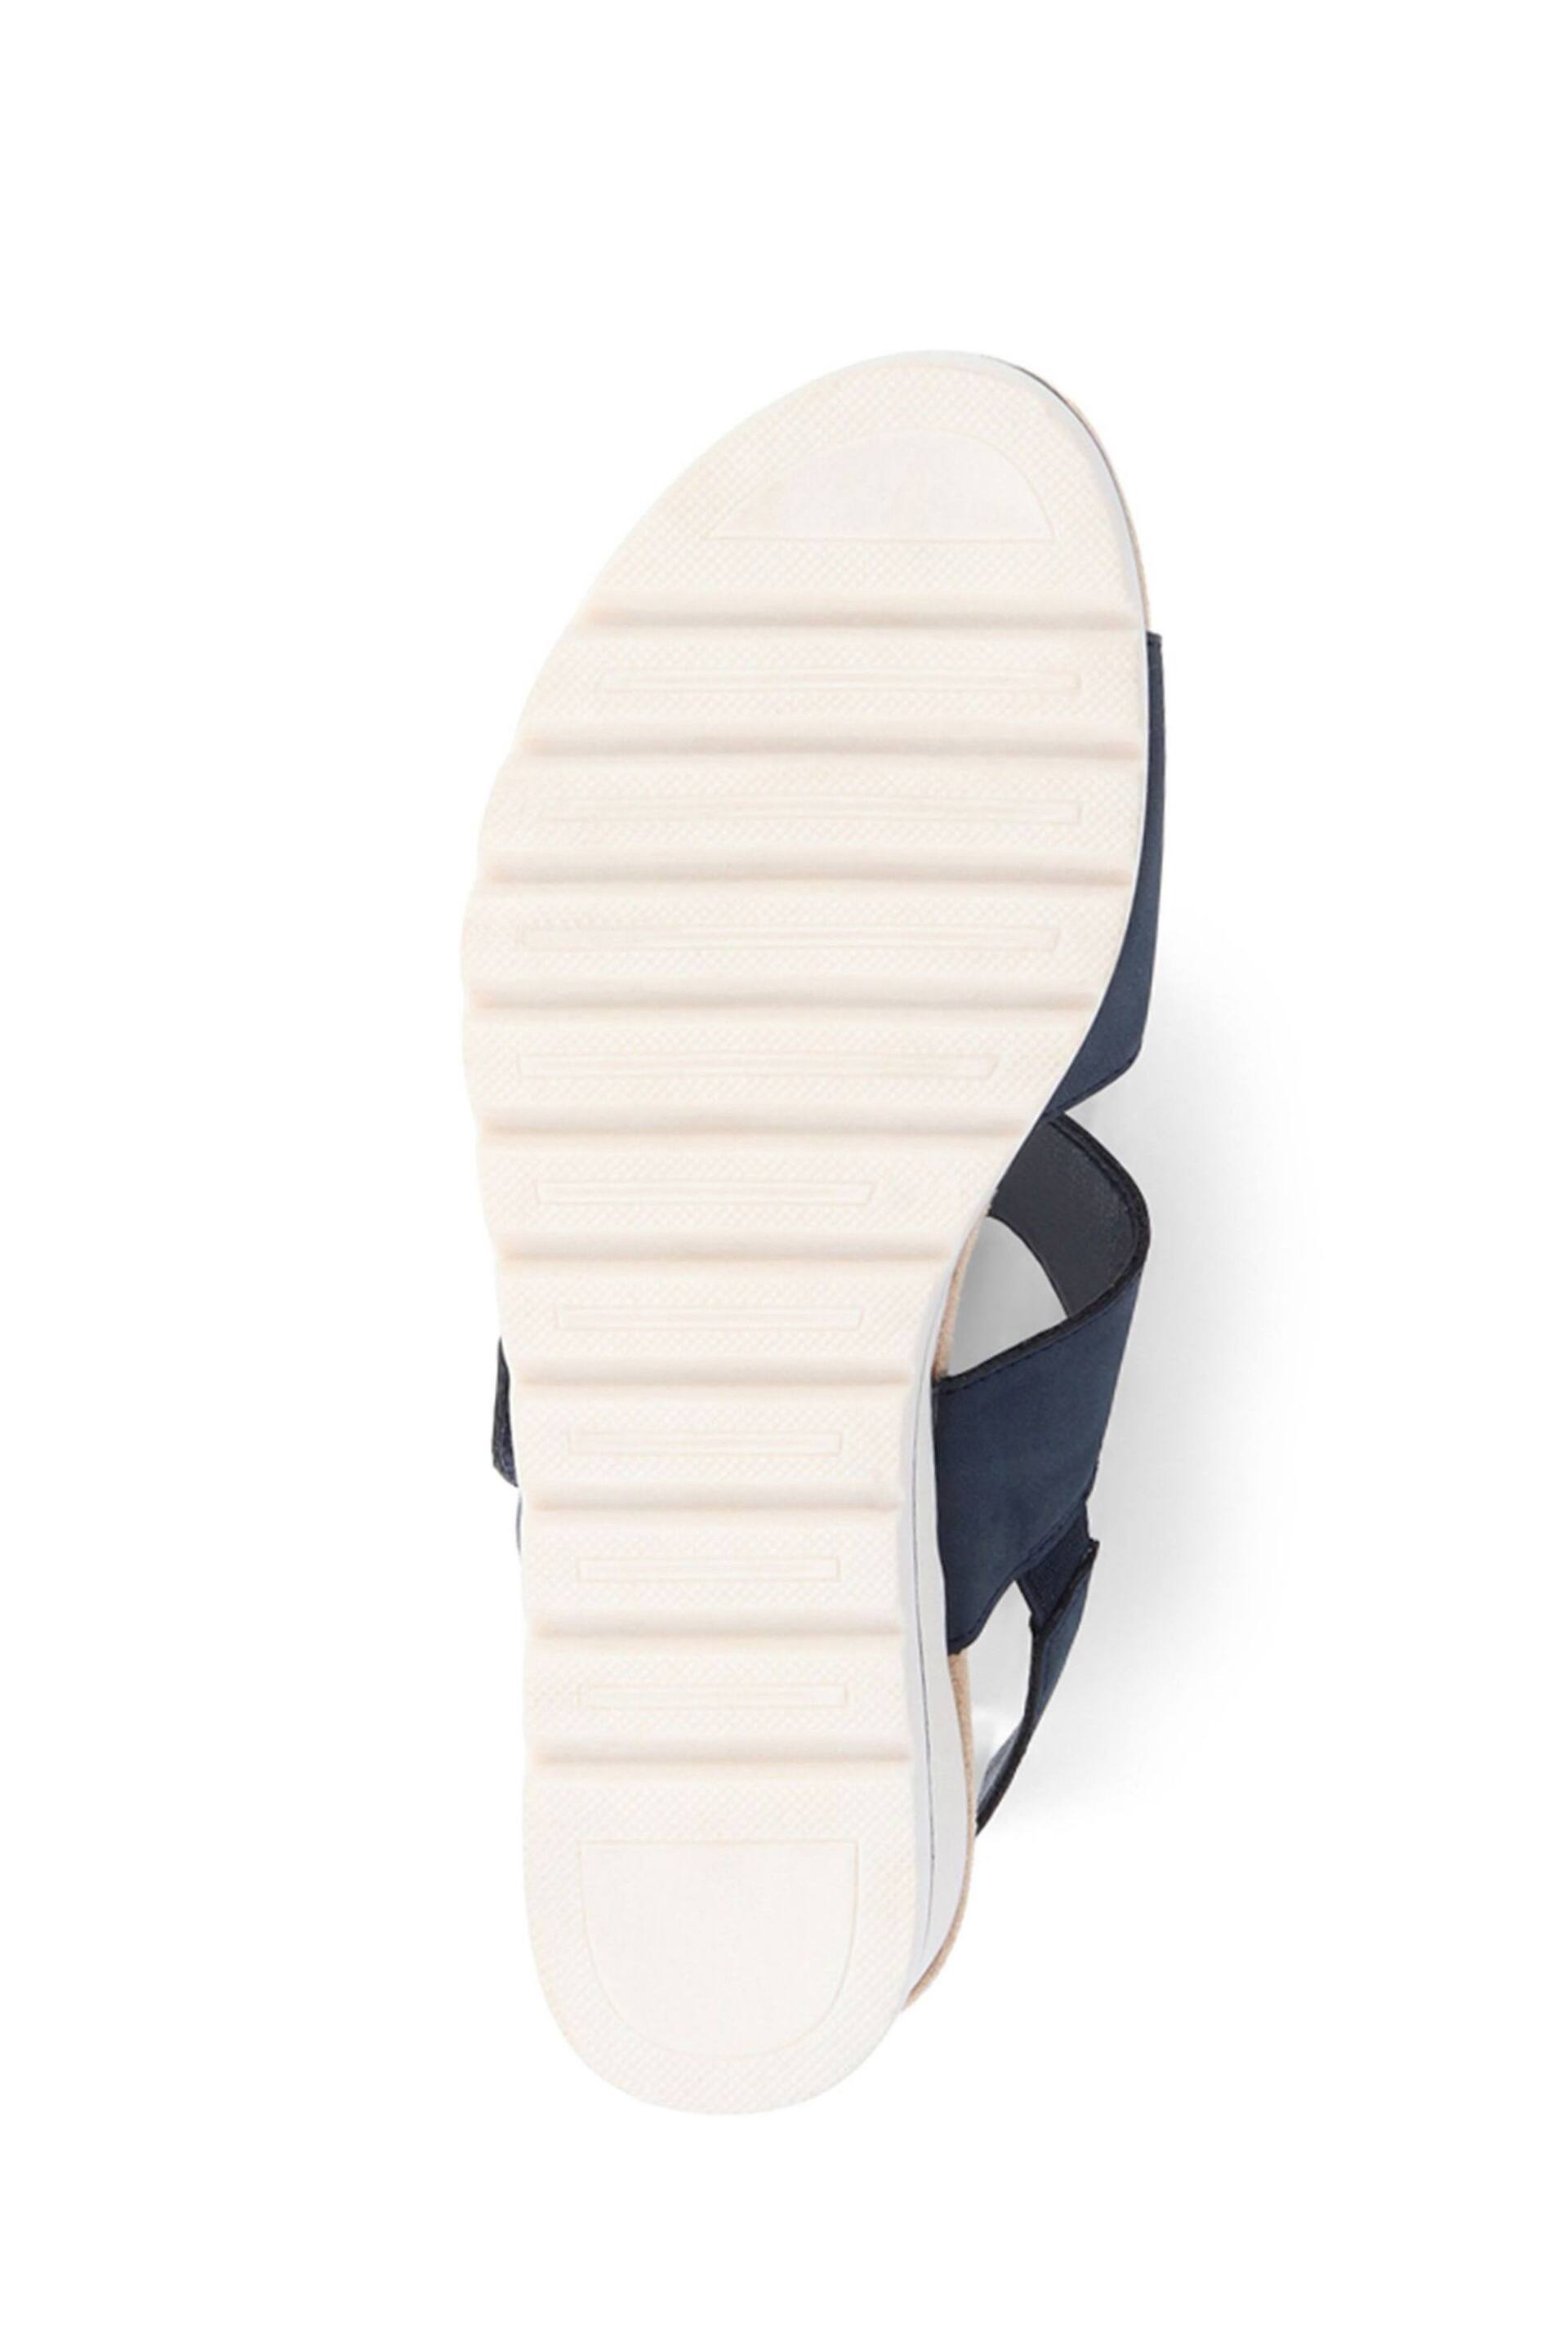 Pavers Touch Fasten Platform Sandals - Image 5 of 5